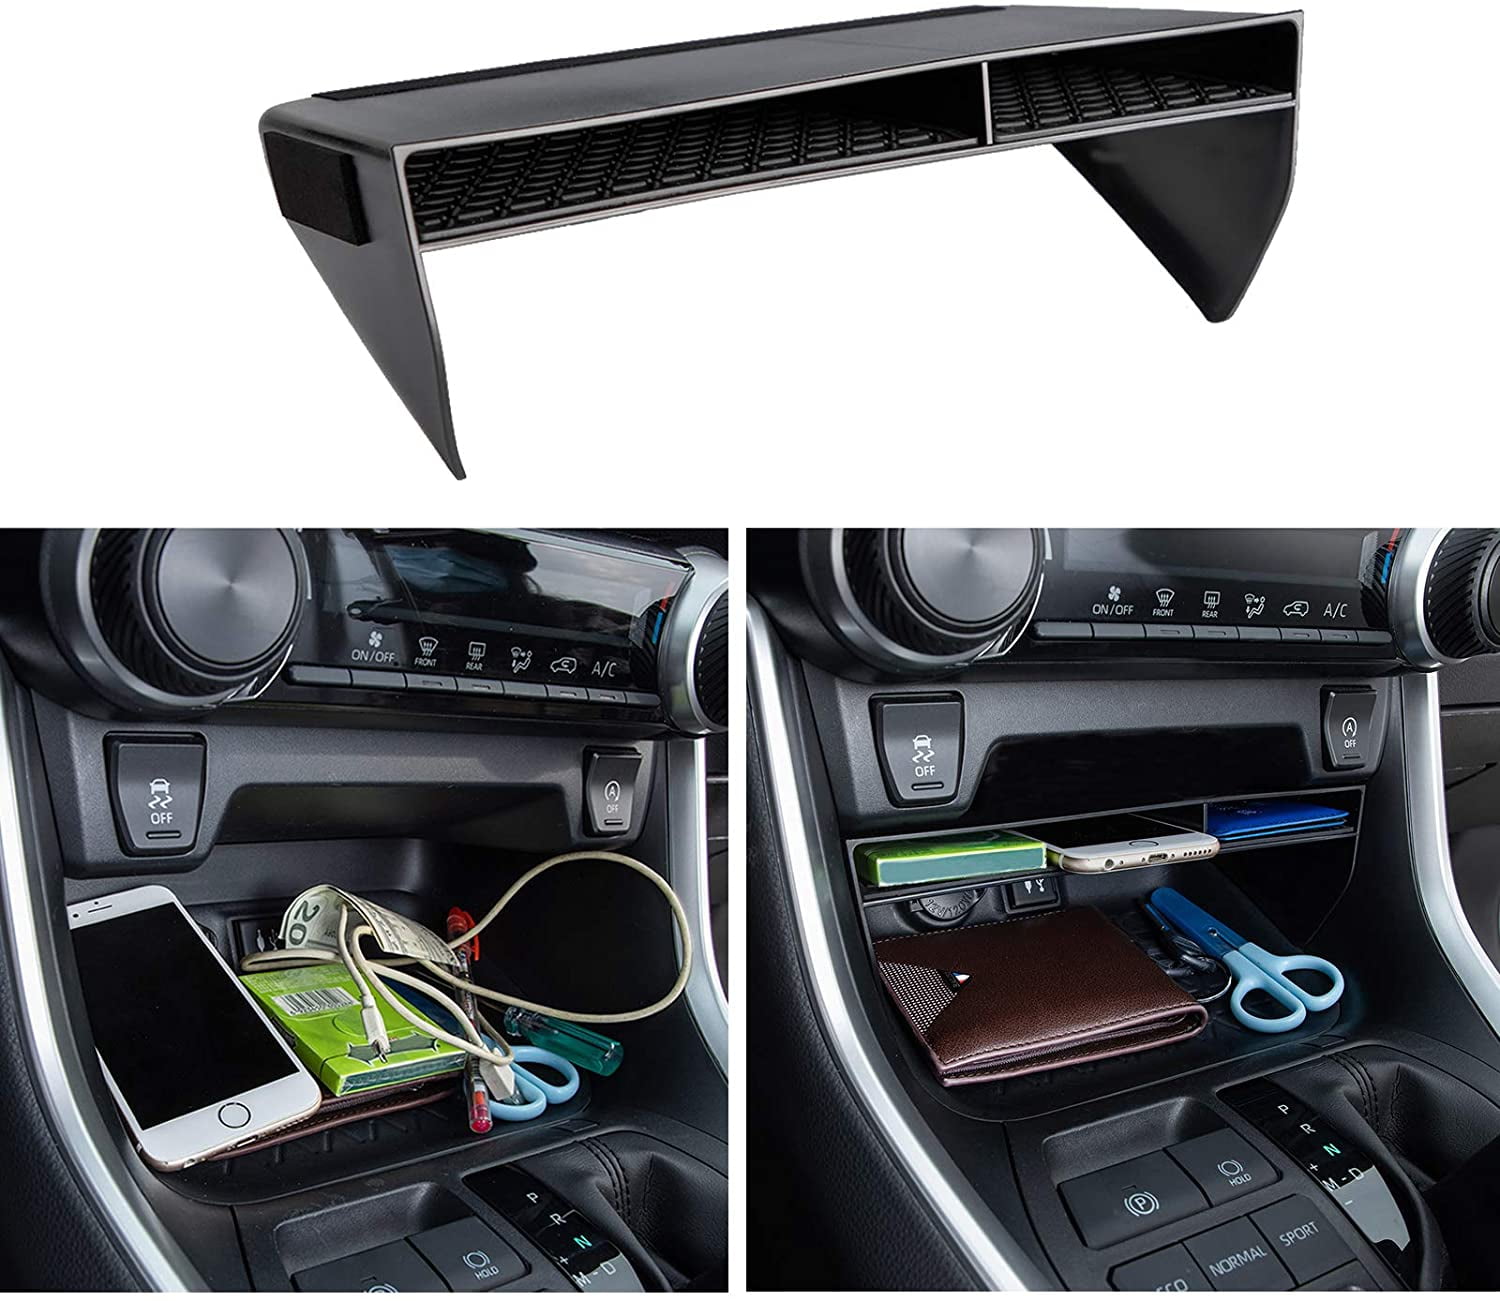 Double Layers Non-Slip Organizer for Cellphone Gear Shift Storage Box Insert Divider Chewing Gum Wallets Cards HIGH FLYING for Toyota RAV4 2019 2020 Accessories Center Console Organizer Tray